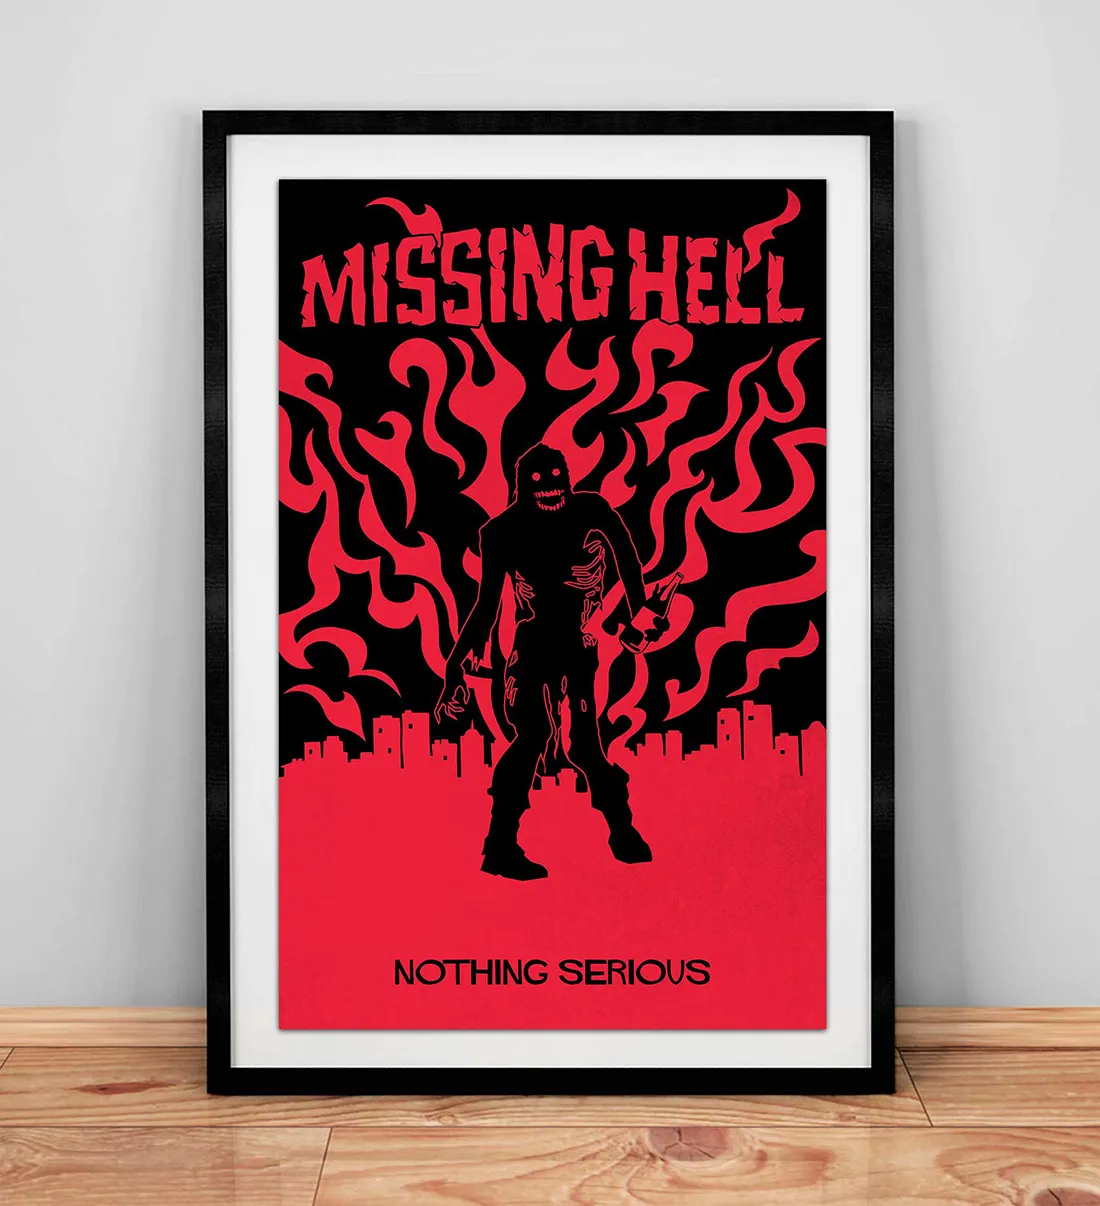 Nothing Serious Poster